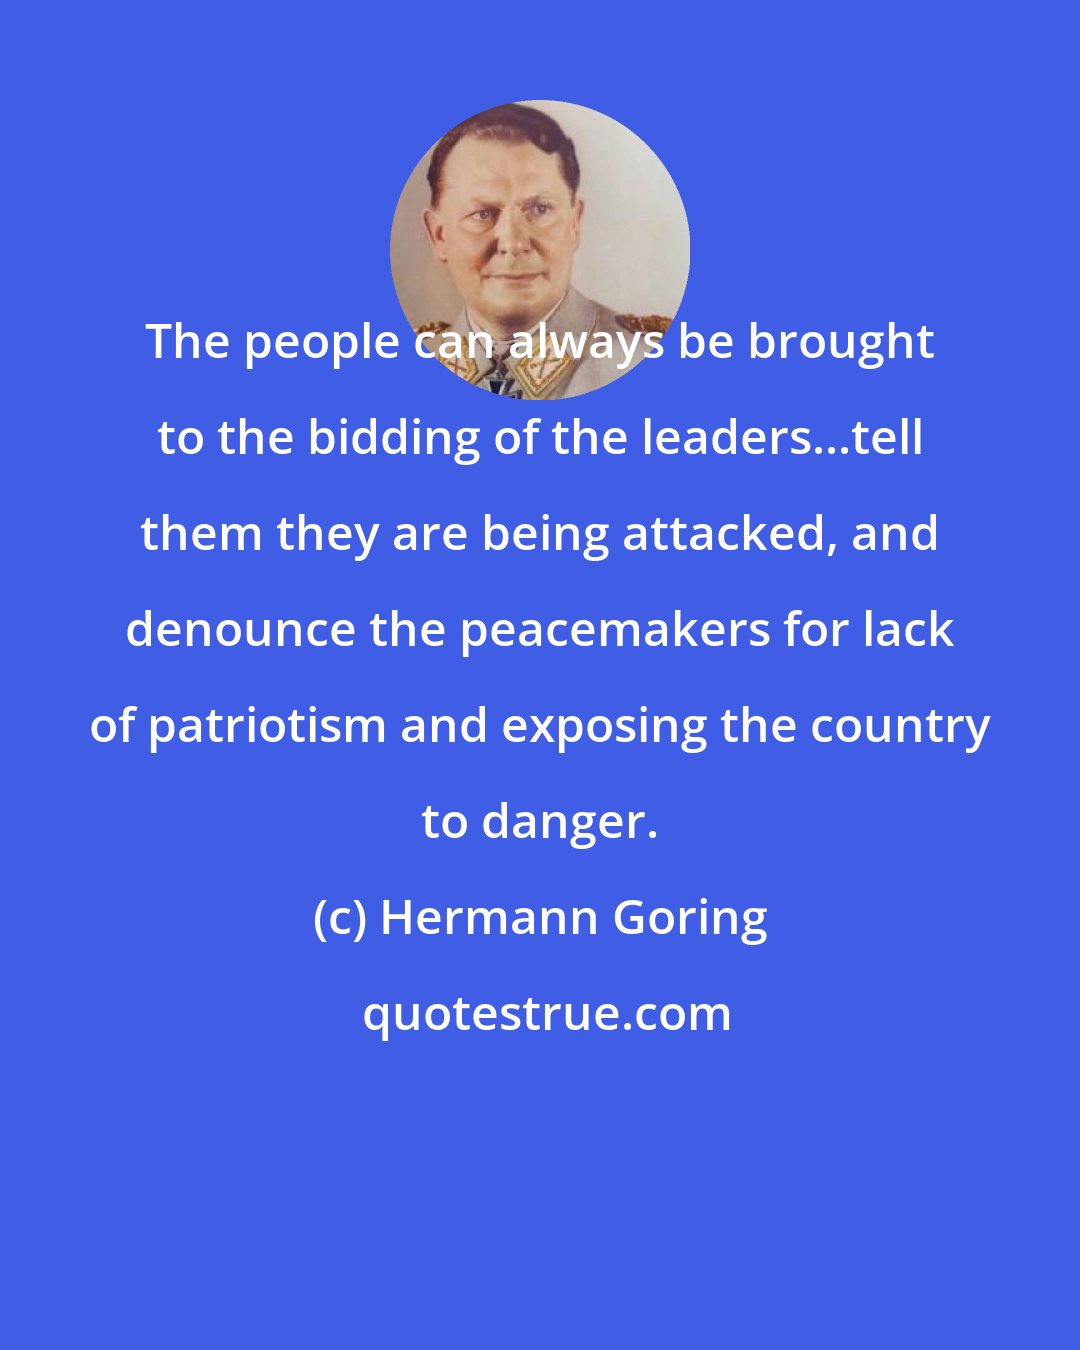 Hermann Goring: The people can always be brought to the bidding of the leaders...tell them they are being attacked, and denounce the peacemakers for lack of patriotism and exposing the country to danger.